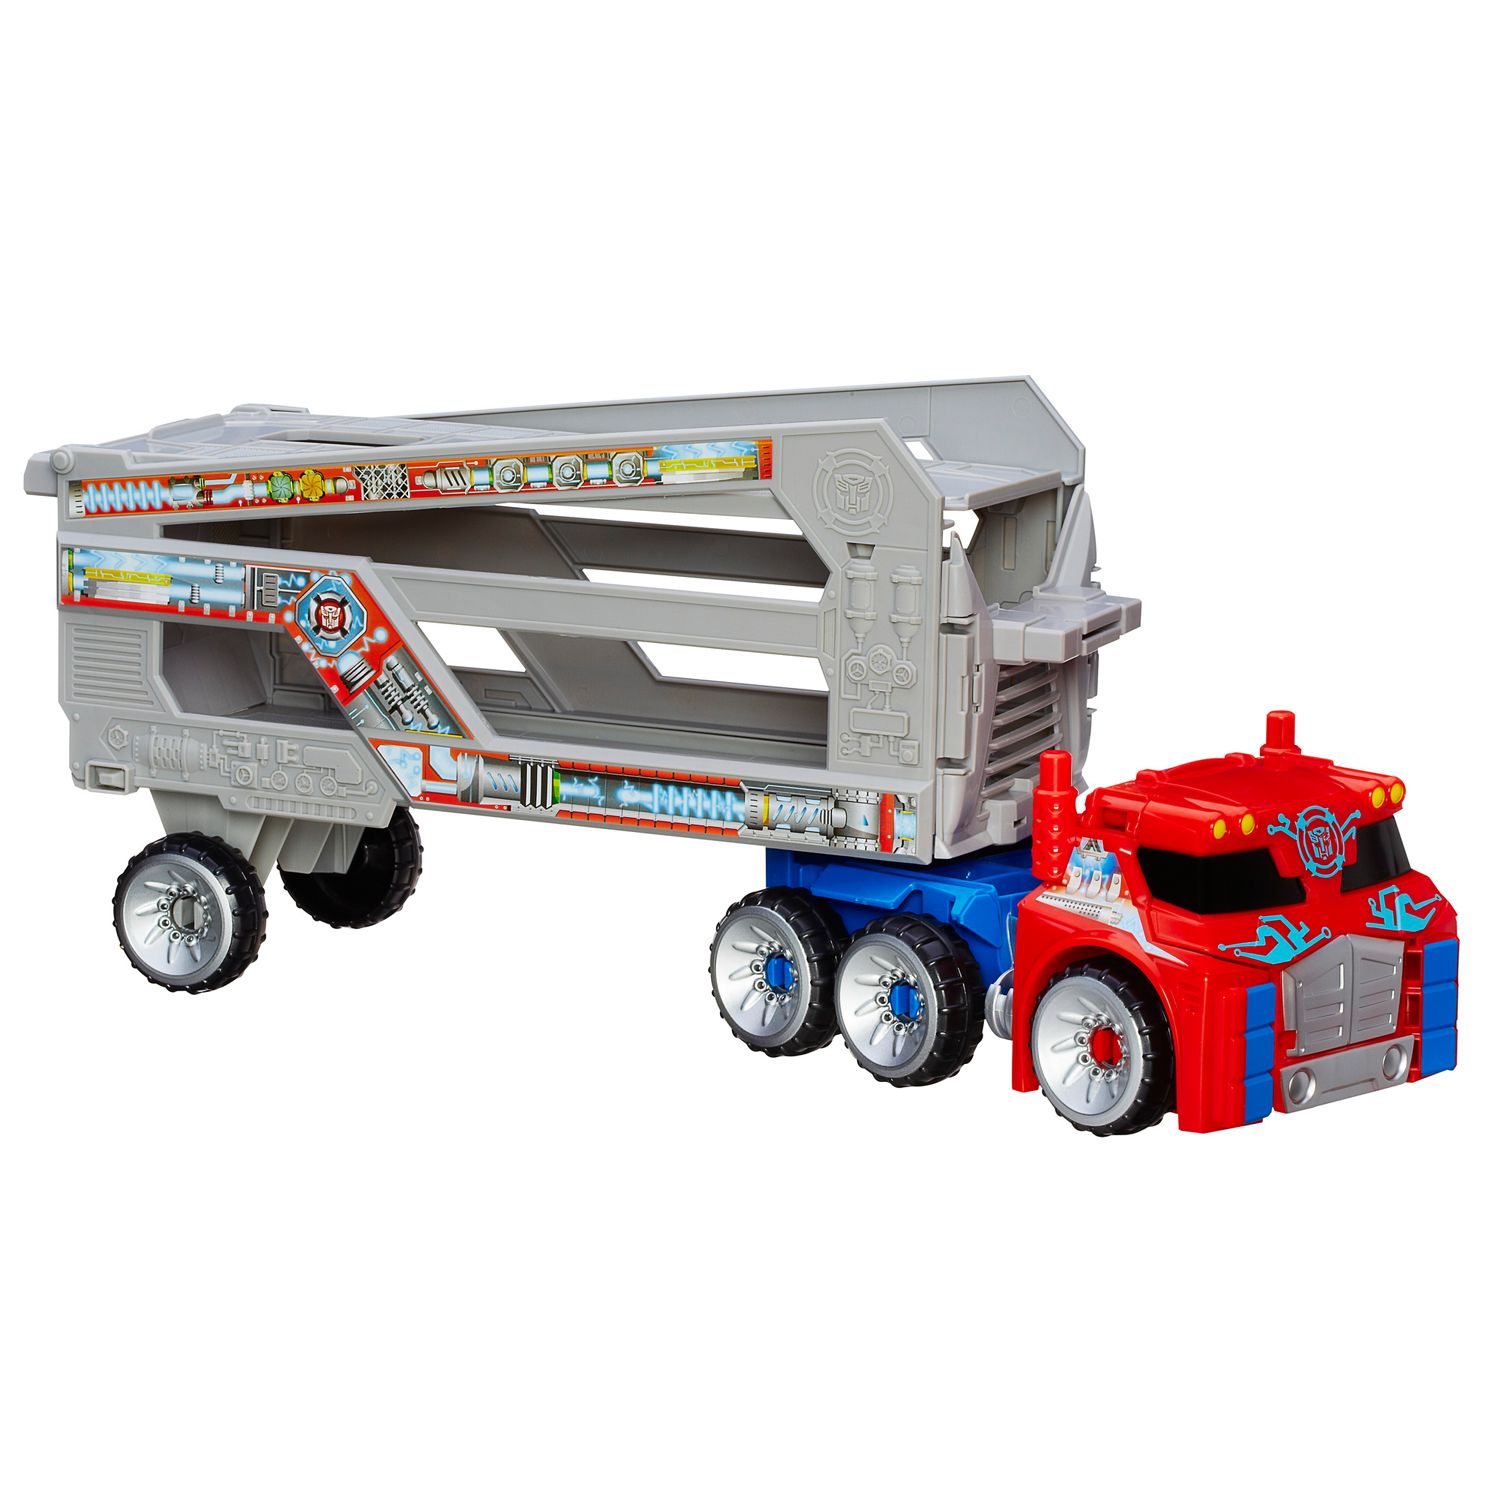 rescue bots recycling truck